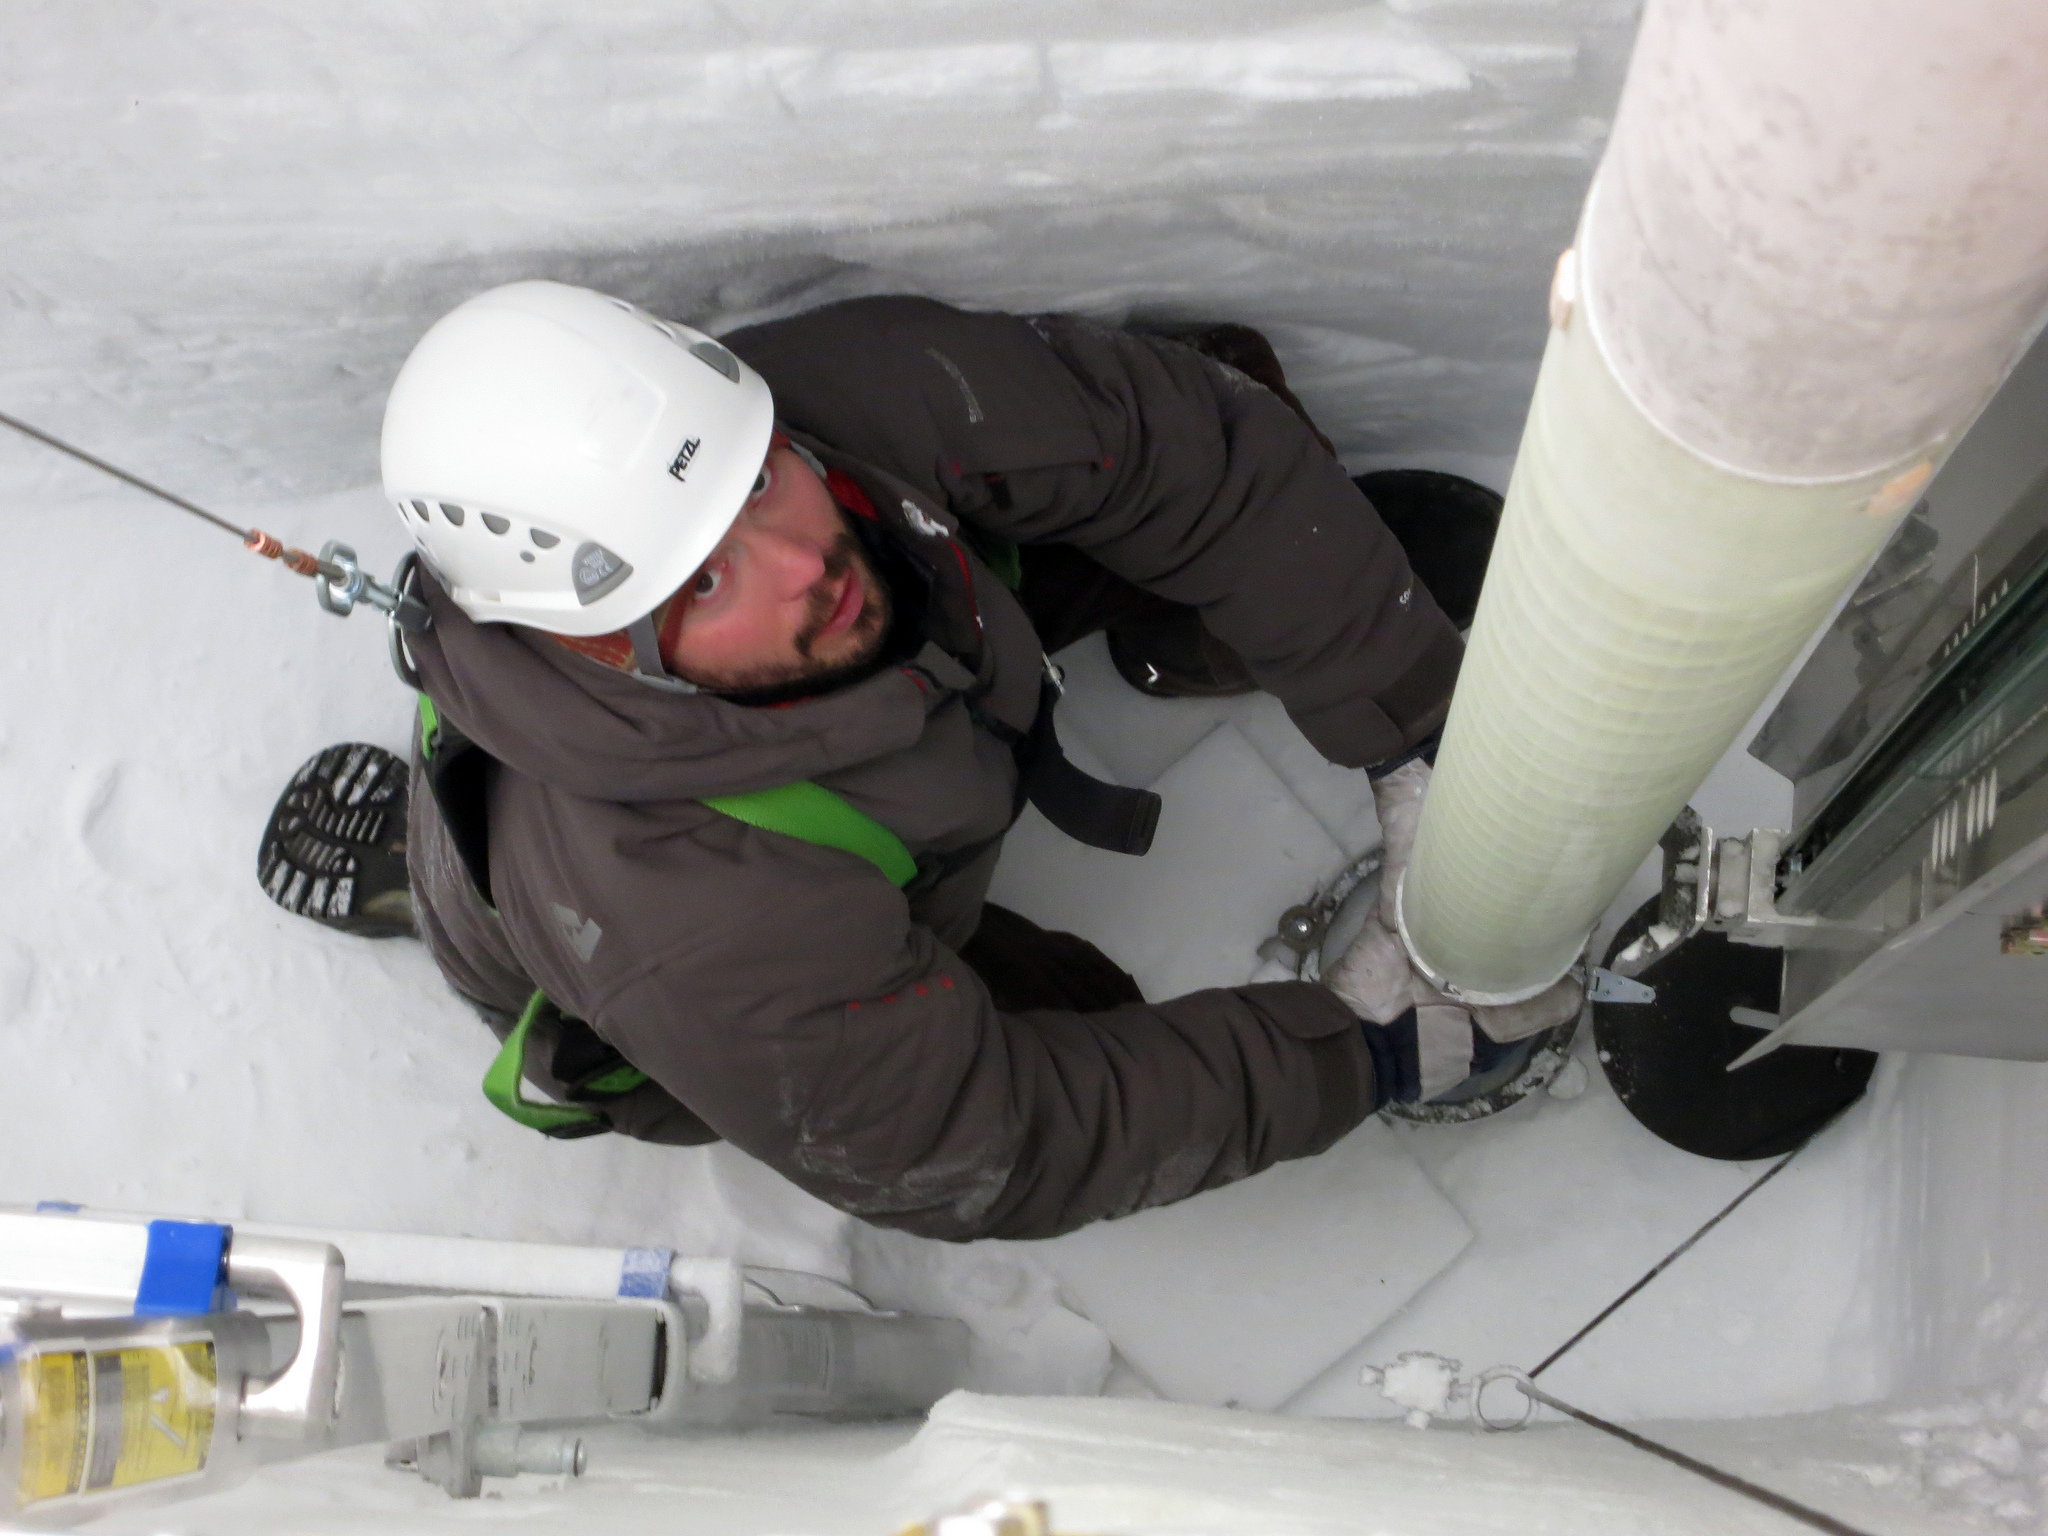 Lead driller Tanner Kuhl guides the Intermediate Depth Drill into position to start ice-coring operations